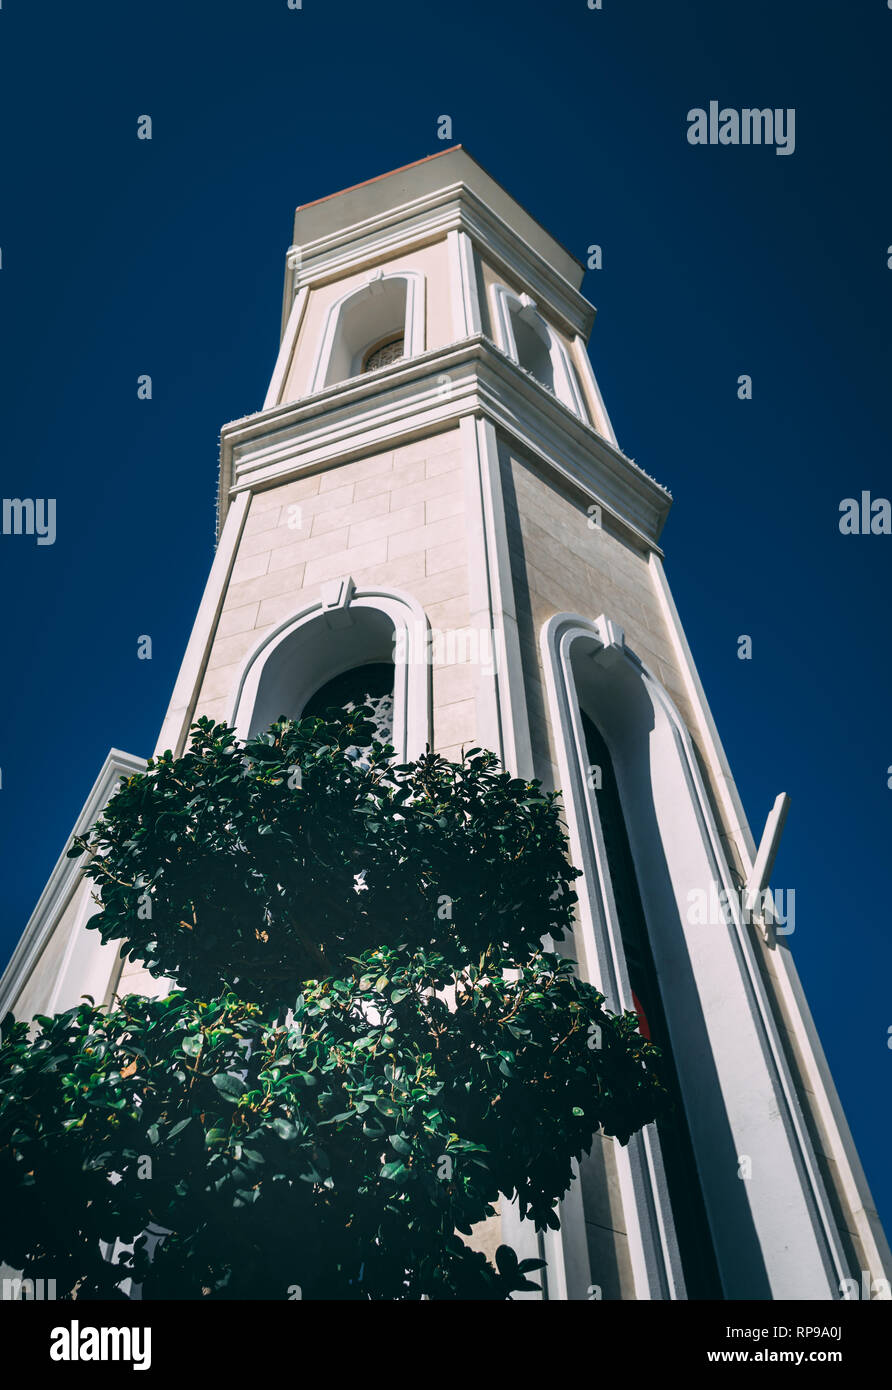 Antalya, Turkey - 10th Feburary 2019: Tower with tree in front of it in Land of Legends theme mall. High tower, view from bottom. Perspective view Stock Photo